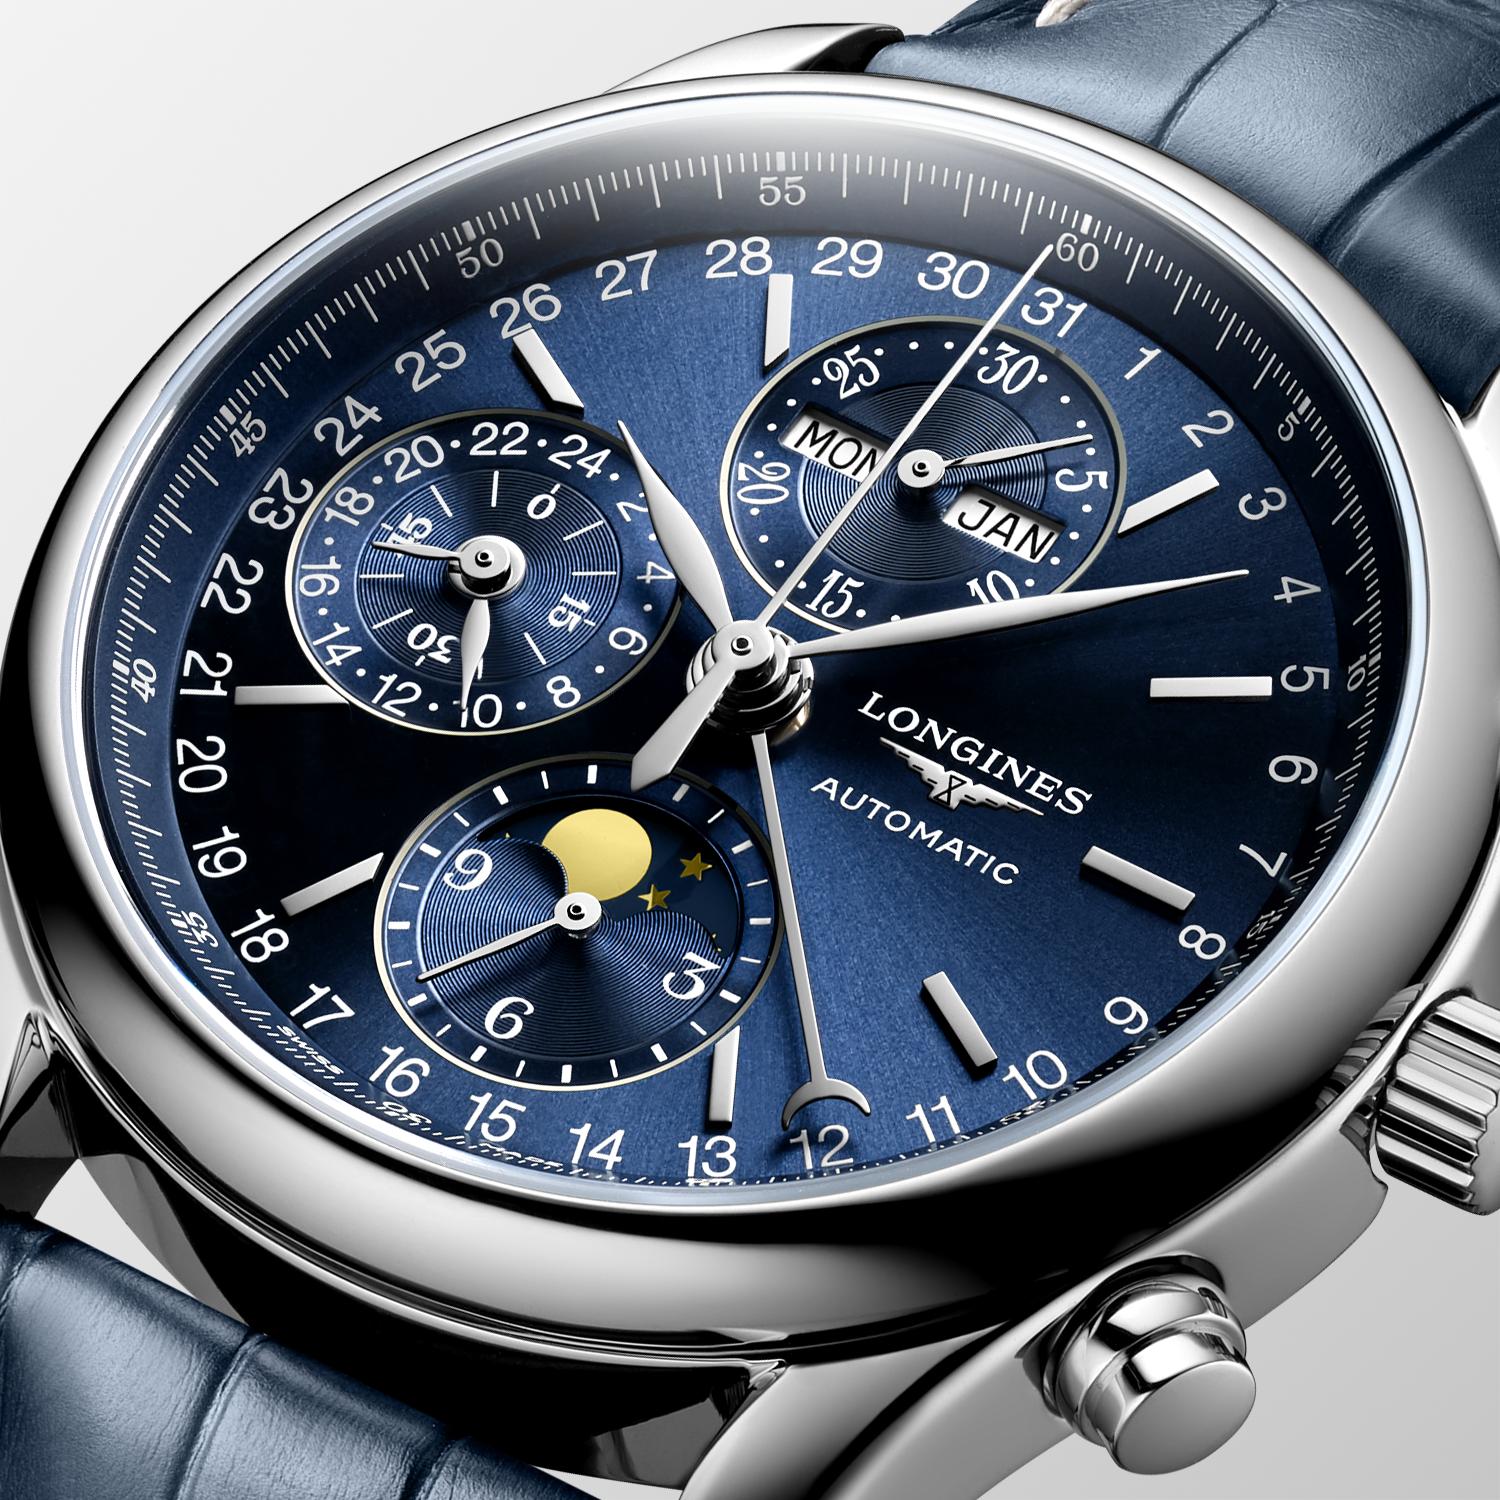 Longines Master Collection Annual Calendar Moonphase Automatic (Blue Dial / 40mm)